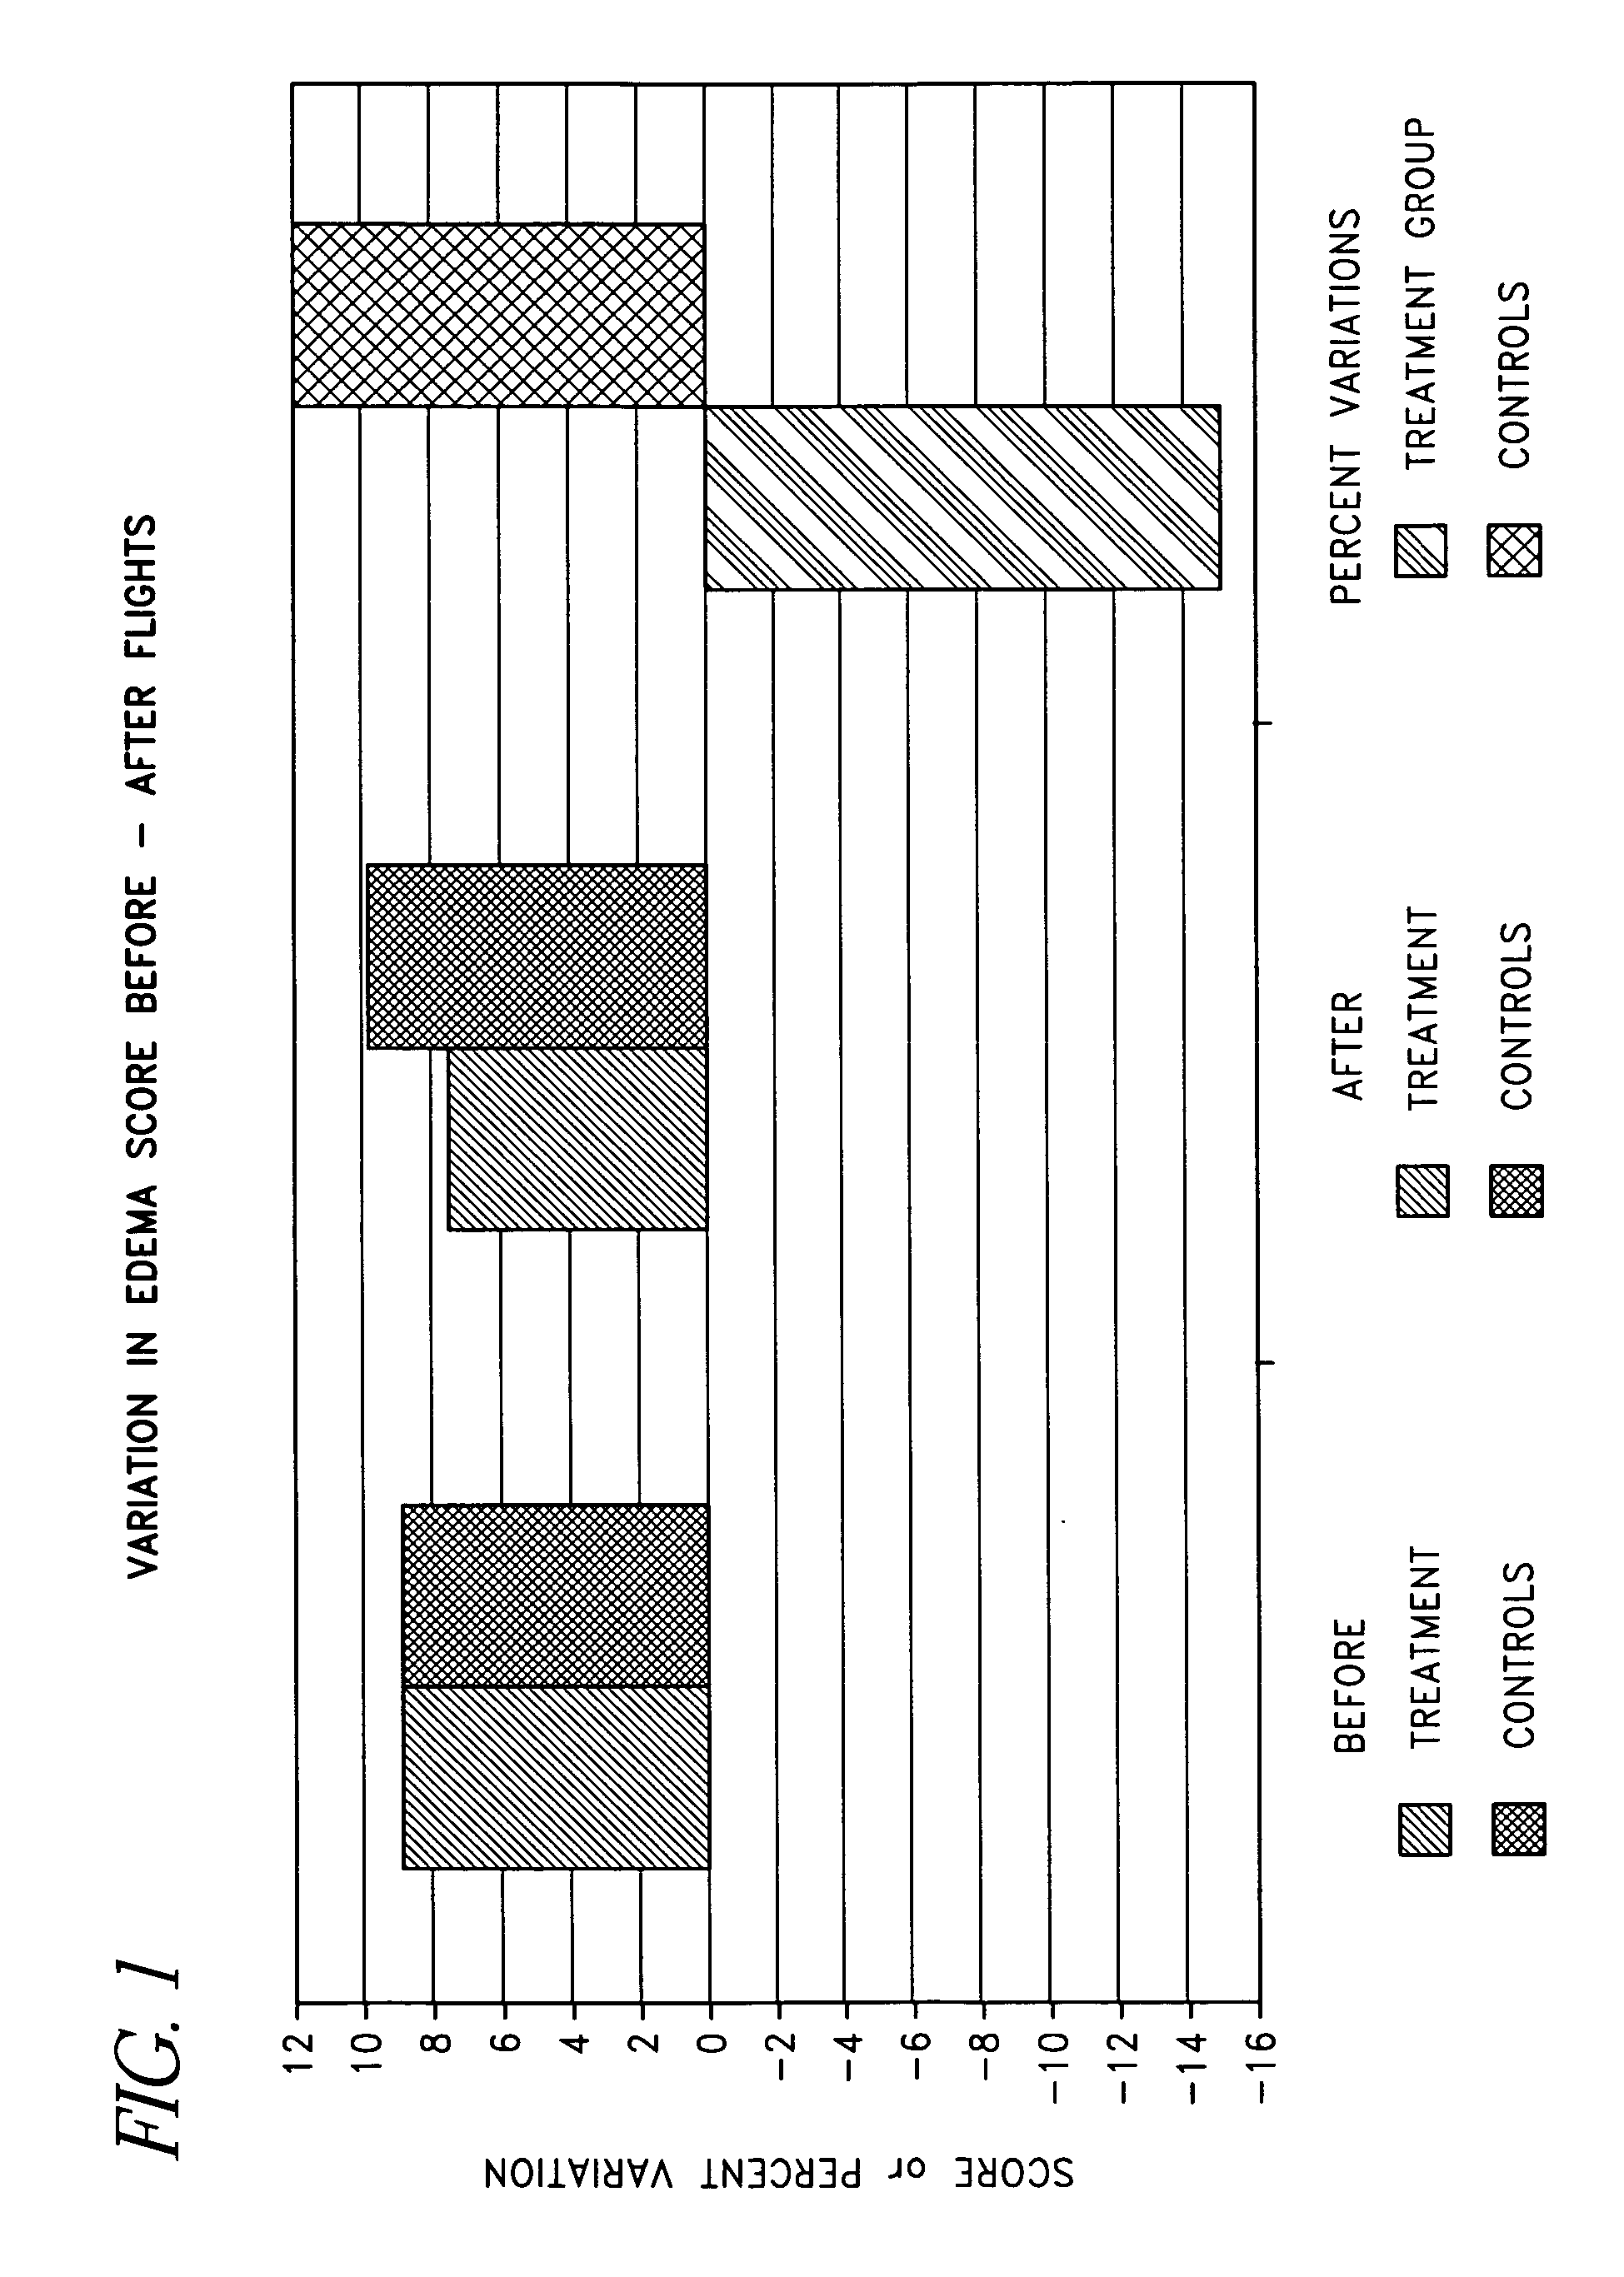 Method and composition for preventing or reducing edema, deep vein thrombosis and/or pulmonary embolism